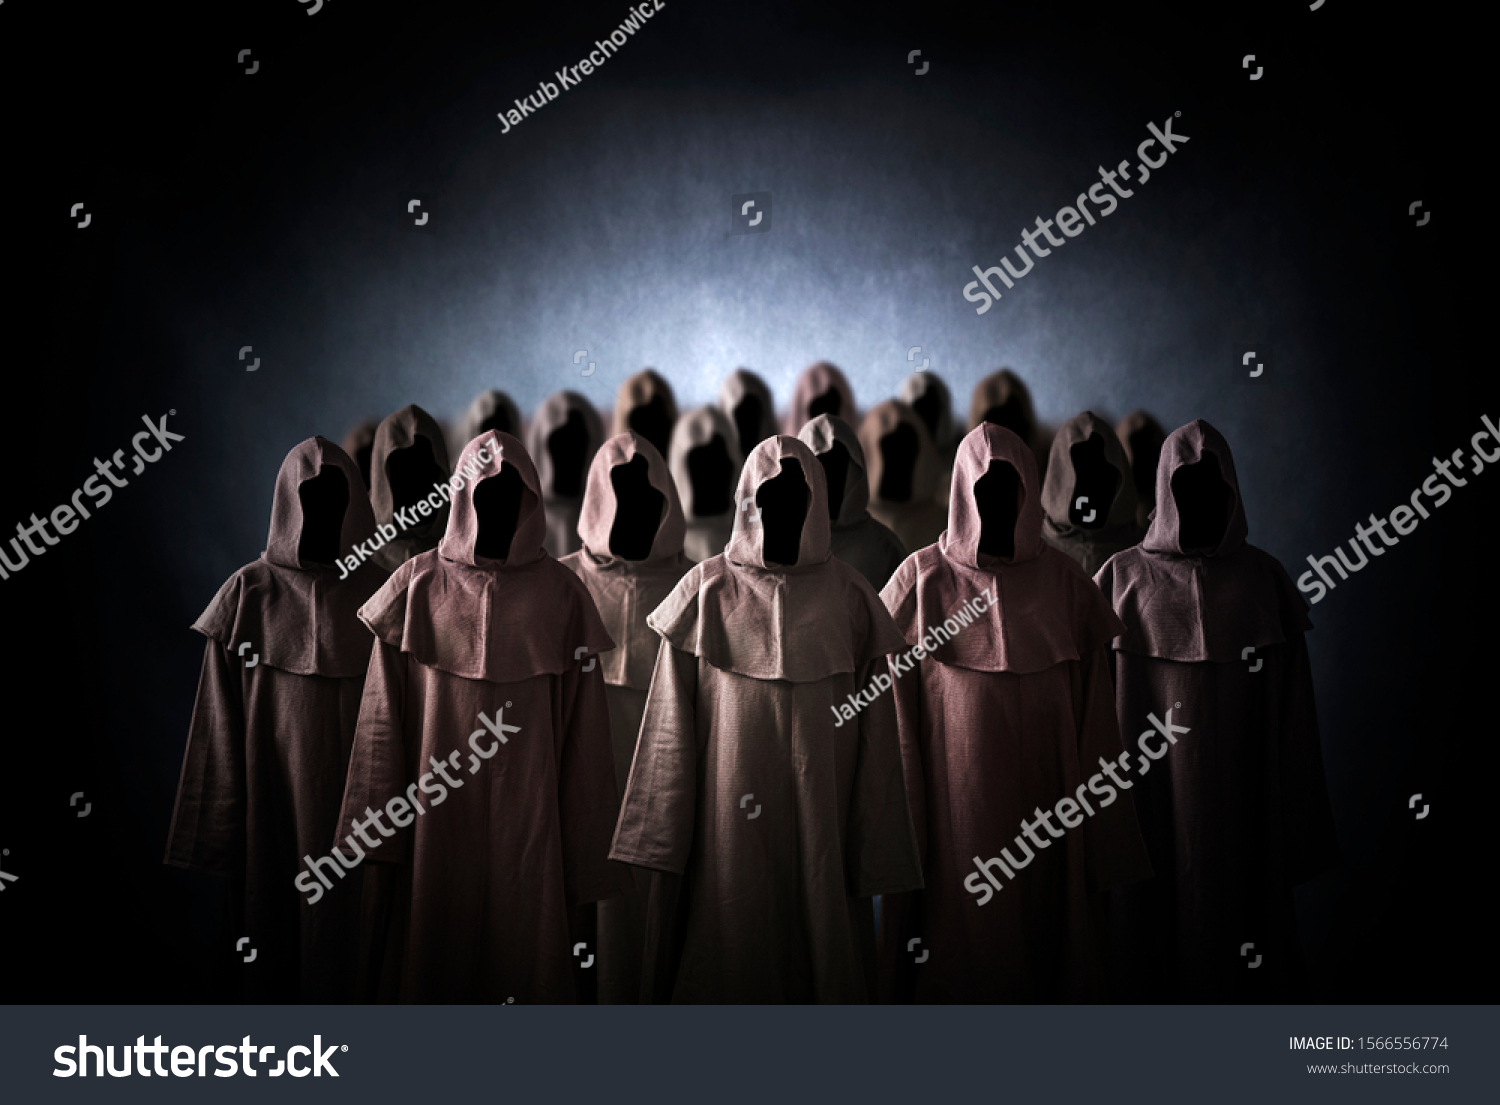 Group of scary figures in hooded cloaks #1566556774